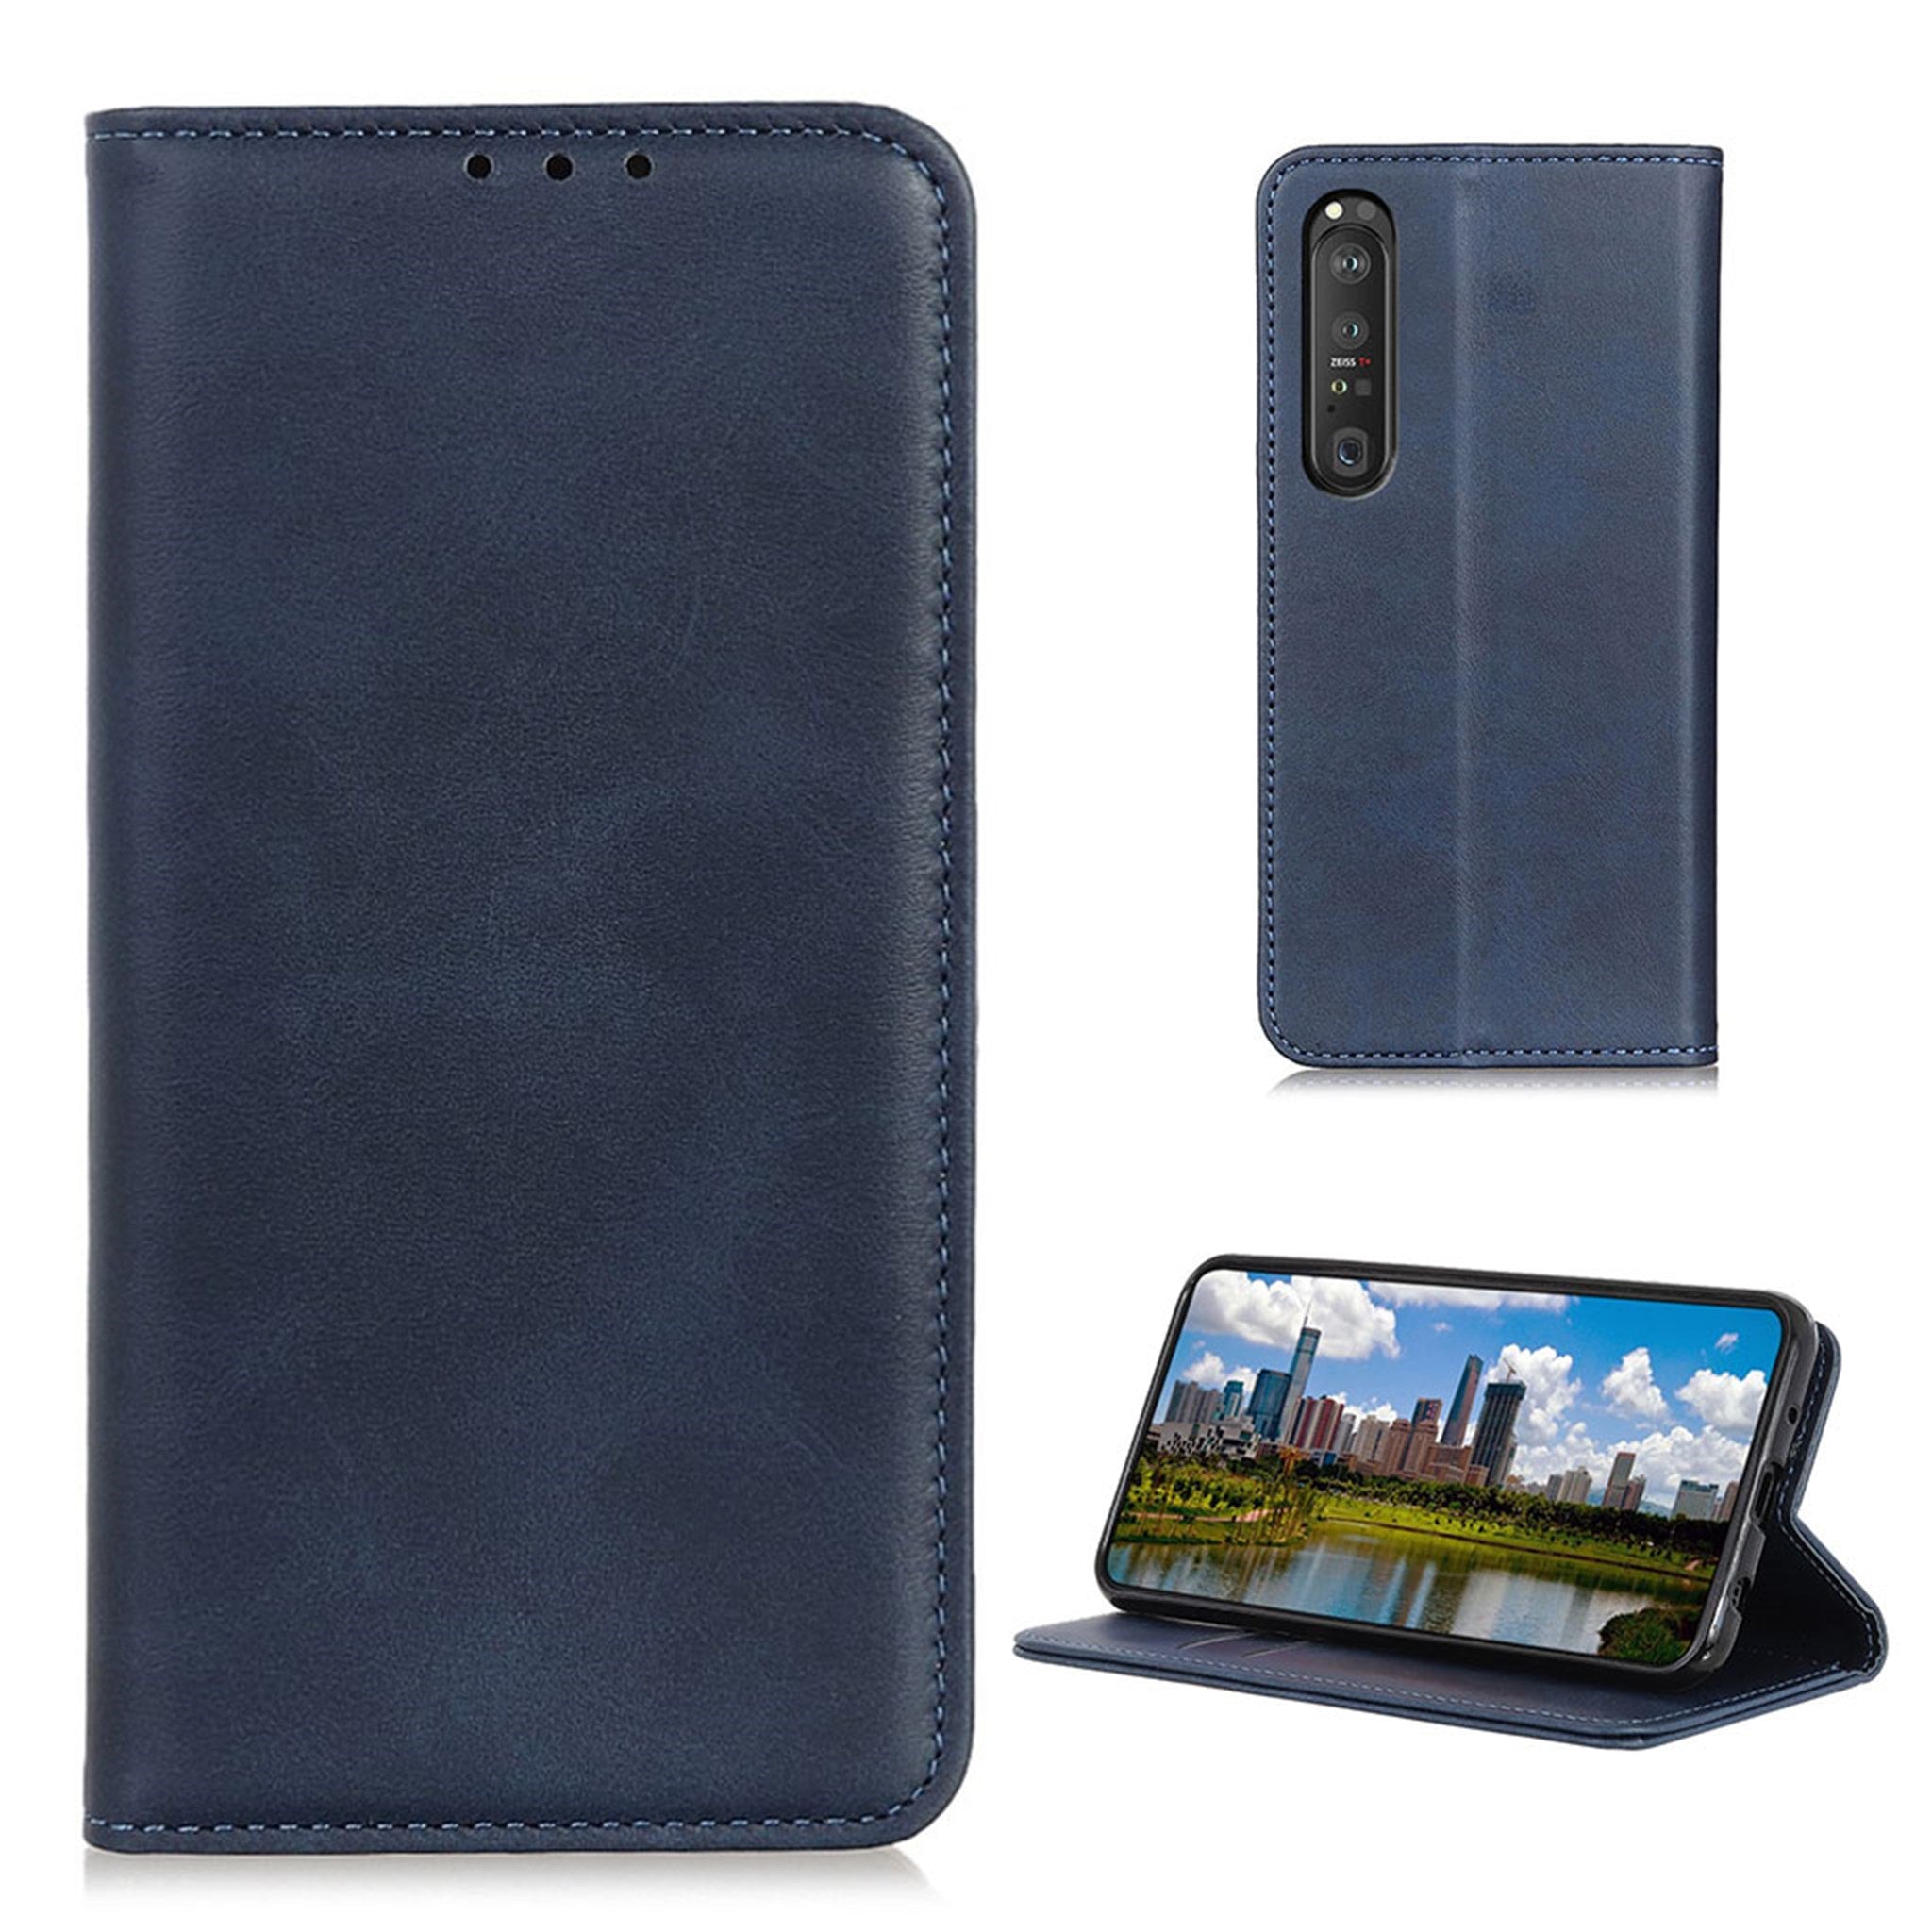 Wallet-style genuine leather flipcase for Sony Xperia 1 III - Blue